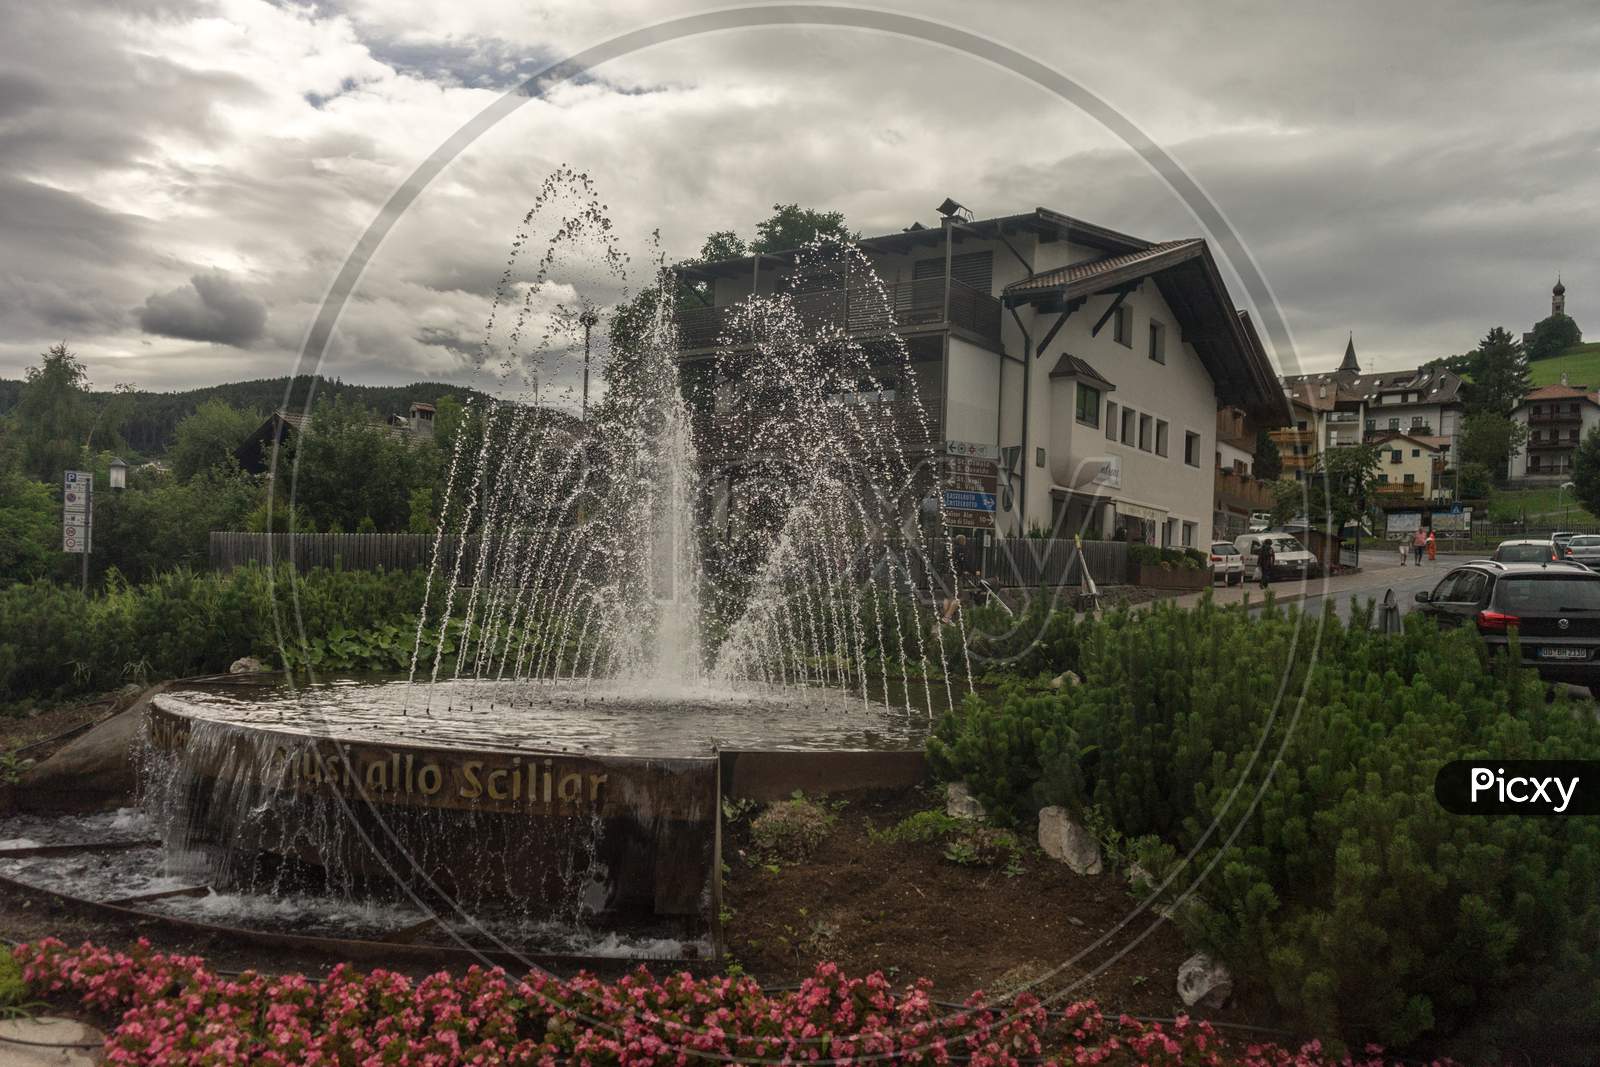 Italy - 28 June 2018: The Water Fountain At Siusi Allo Sciliar In Kastelruth, Italy